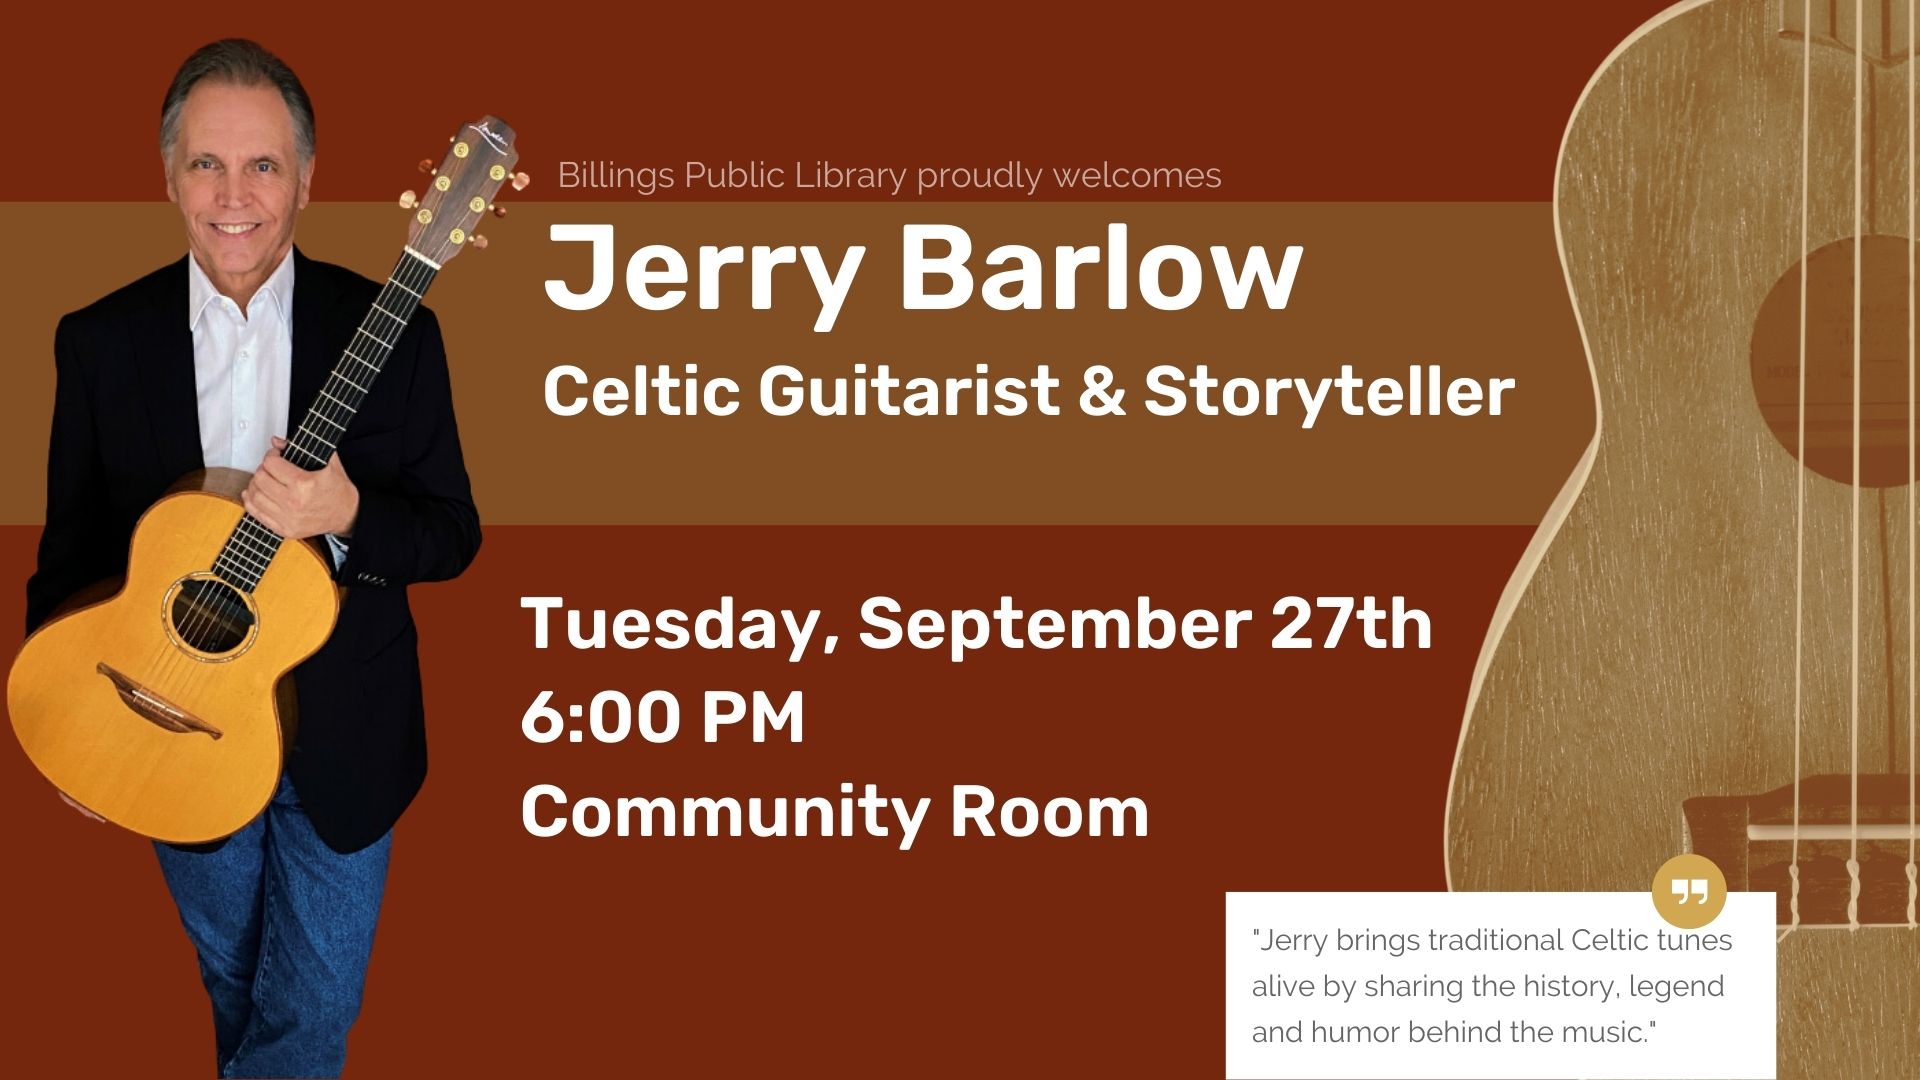 Poster for Jerry Barlow's concert on September 27th at 6:00 pm